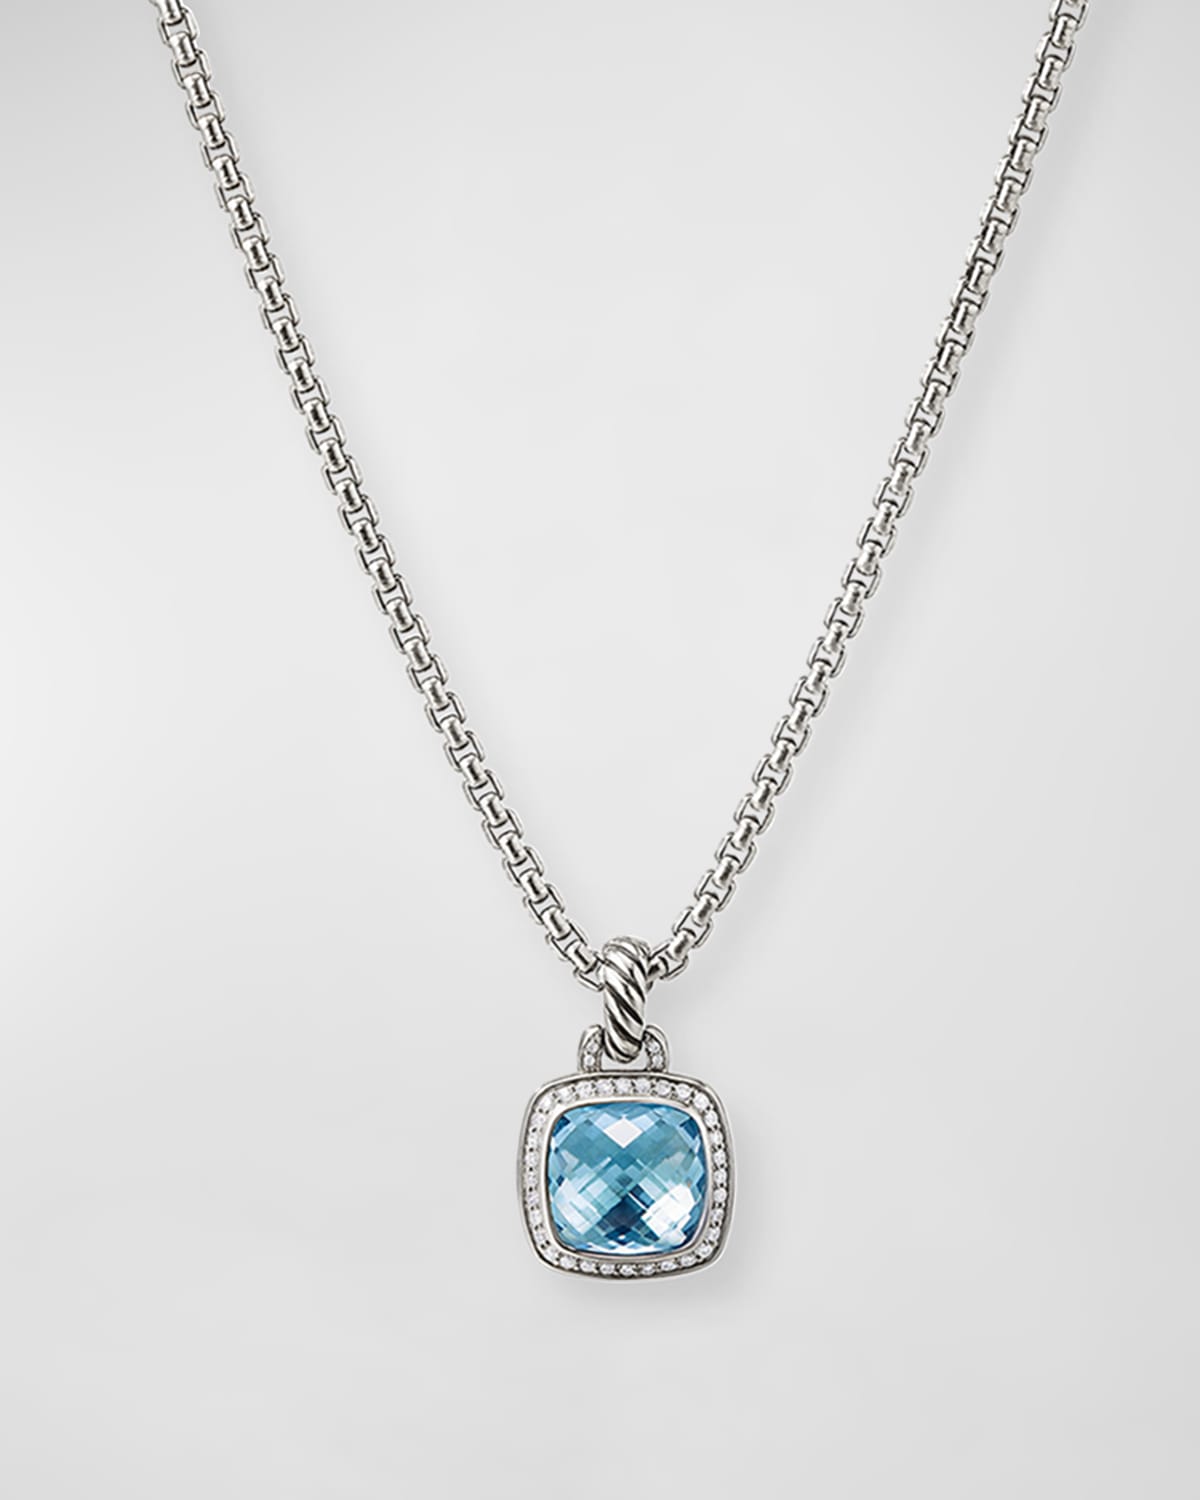 Albion Pendant with Diamonds in Silver, 15.3mm